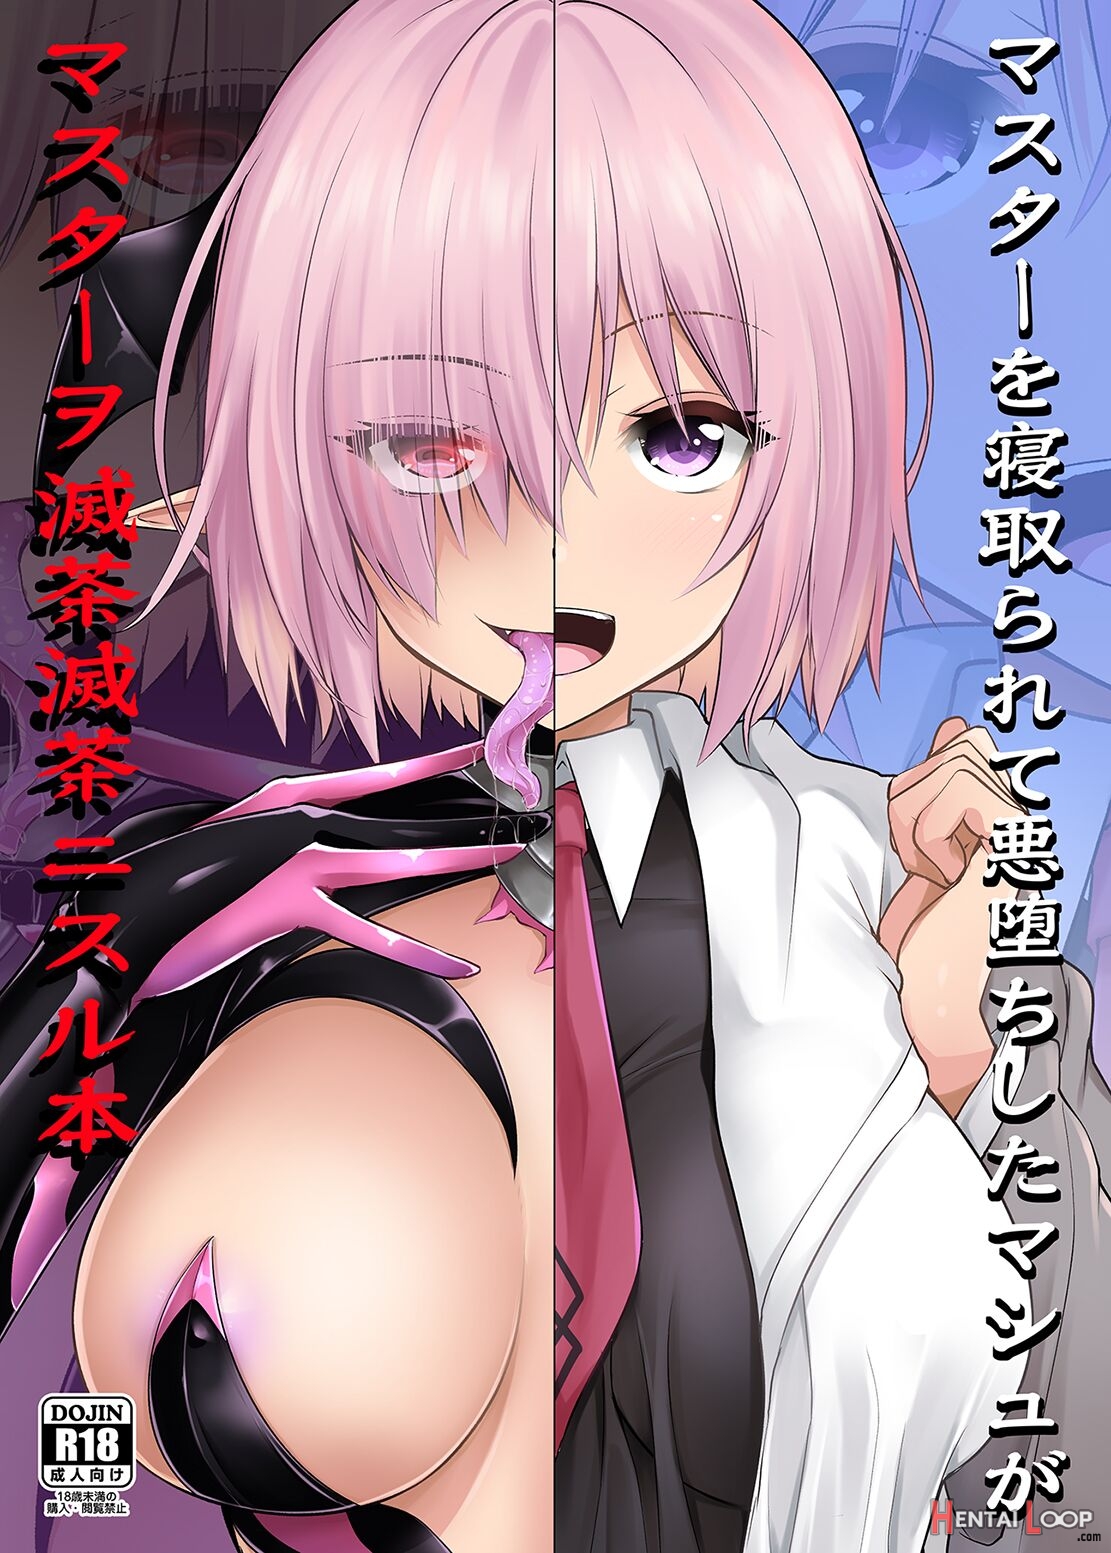 A Book About A Corrupted Mash Recklessly Making Love To Her Ntr’d Master page 1